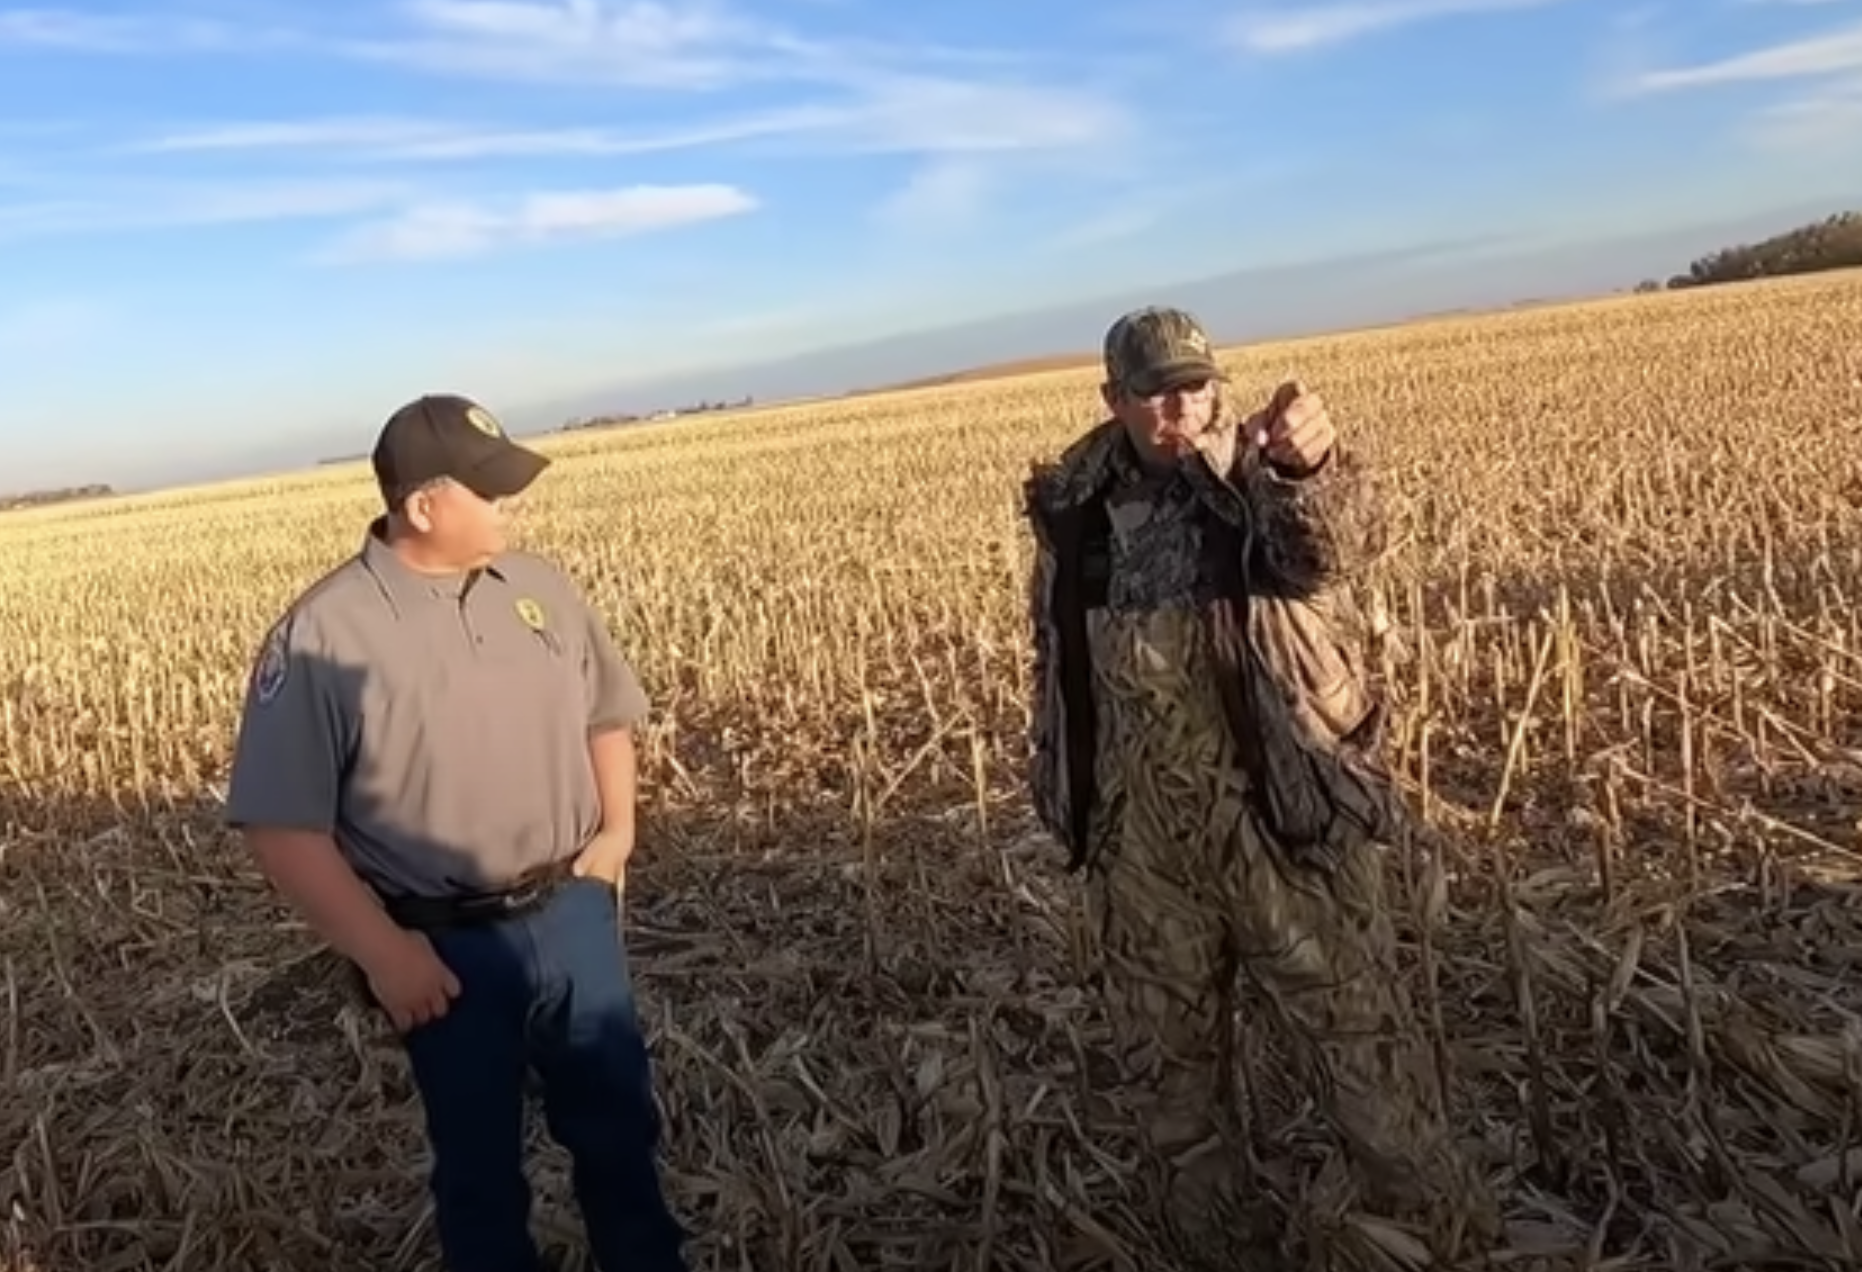 Landowner in “I Own the F*cking Land” Video Takes Plea Deal